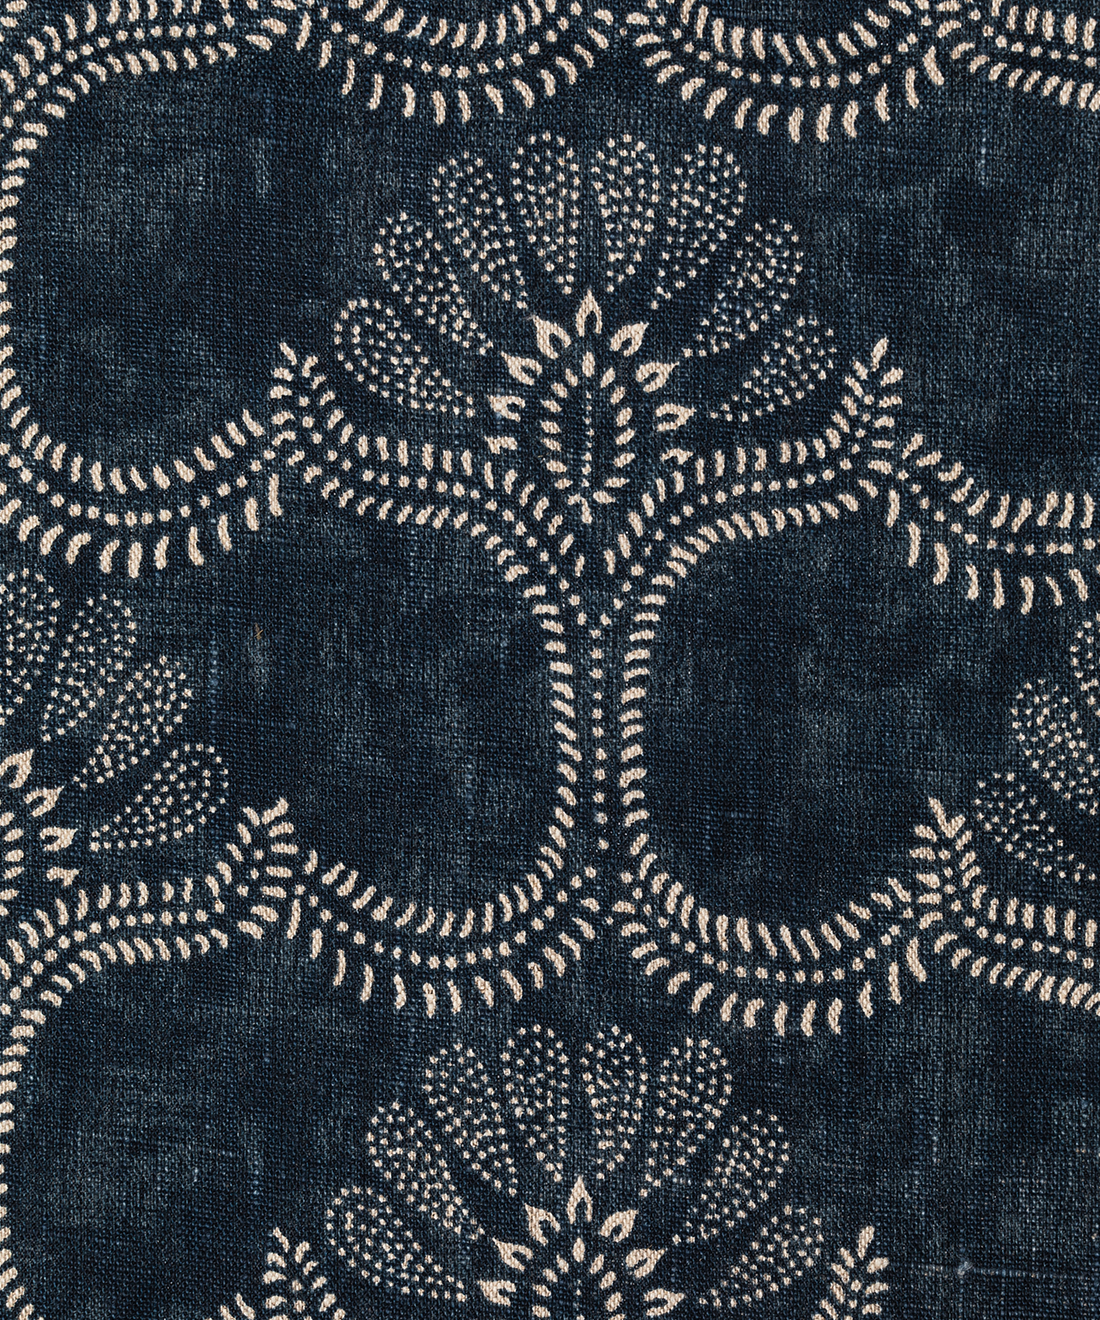 Whiteman & Mellor's Arabesque in Blue, Linen Fabric by the Meter